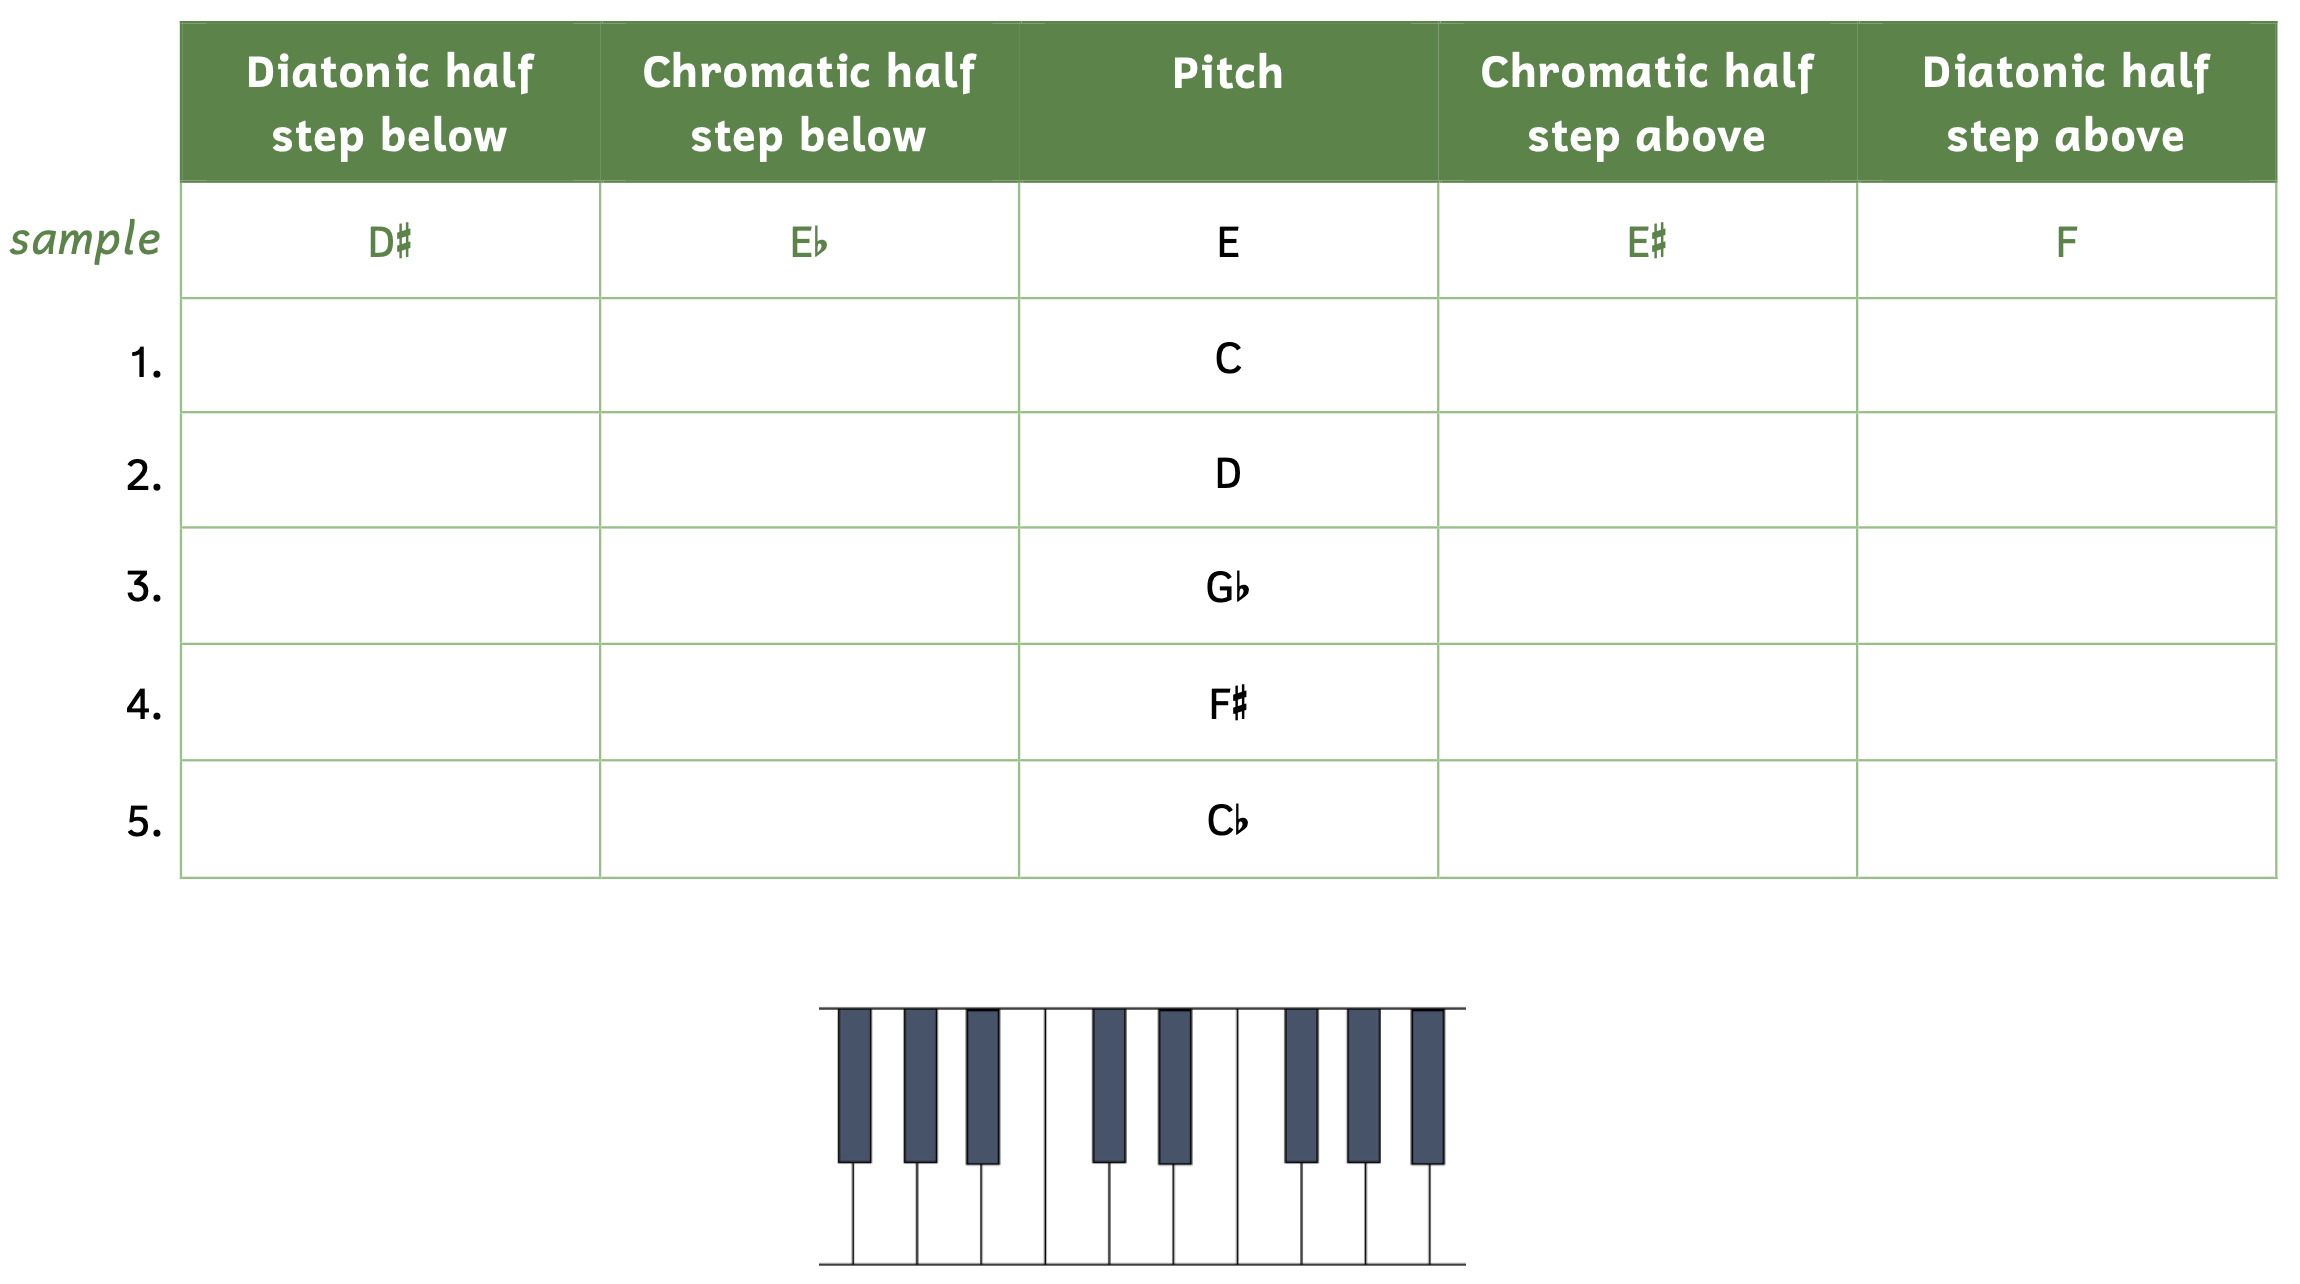 Table of chromatic and diatonic half steps above and below. The first column asks for a diatonic half step below the given pitch, the second column asks for a chromatic half step below the given pitch, the third column is the given pitch, the fourth column asks for a chromatic half step above the given pitch, and the fifth column asks for a diatonic half step above the given pitch. The sample's given pitch is E. A diatonic half step below is D-sharp, a chromatic half step below is E-flat, a chromatic half step above is E-sharp, and a diatonic half step above is F. Number 1's given pitch is C. Number 2's given pitch is D. Number 3's given pitch is G-flat. Number 4's given pitch is F-sharp. Number 5's given pitch is C-flat.